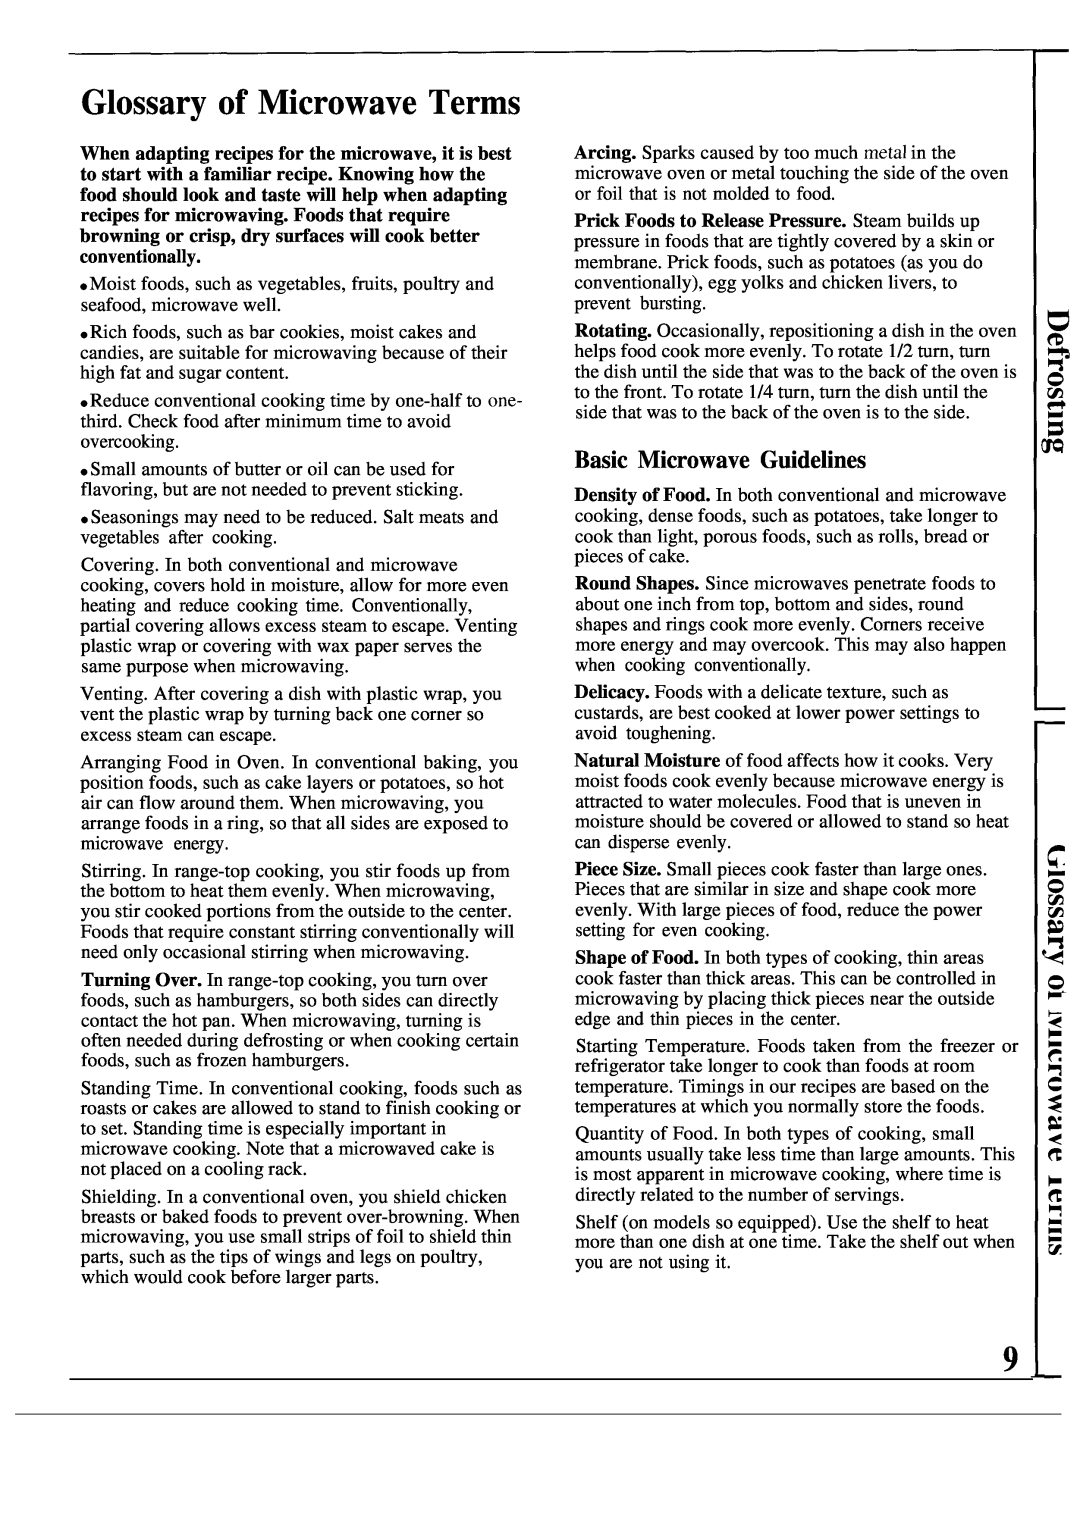 GE JES41W warranty Glossary of Microwave Terms, Basic Microwave Guidelines 